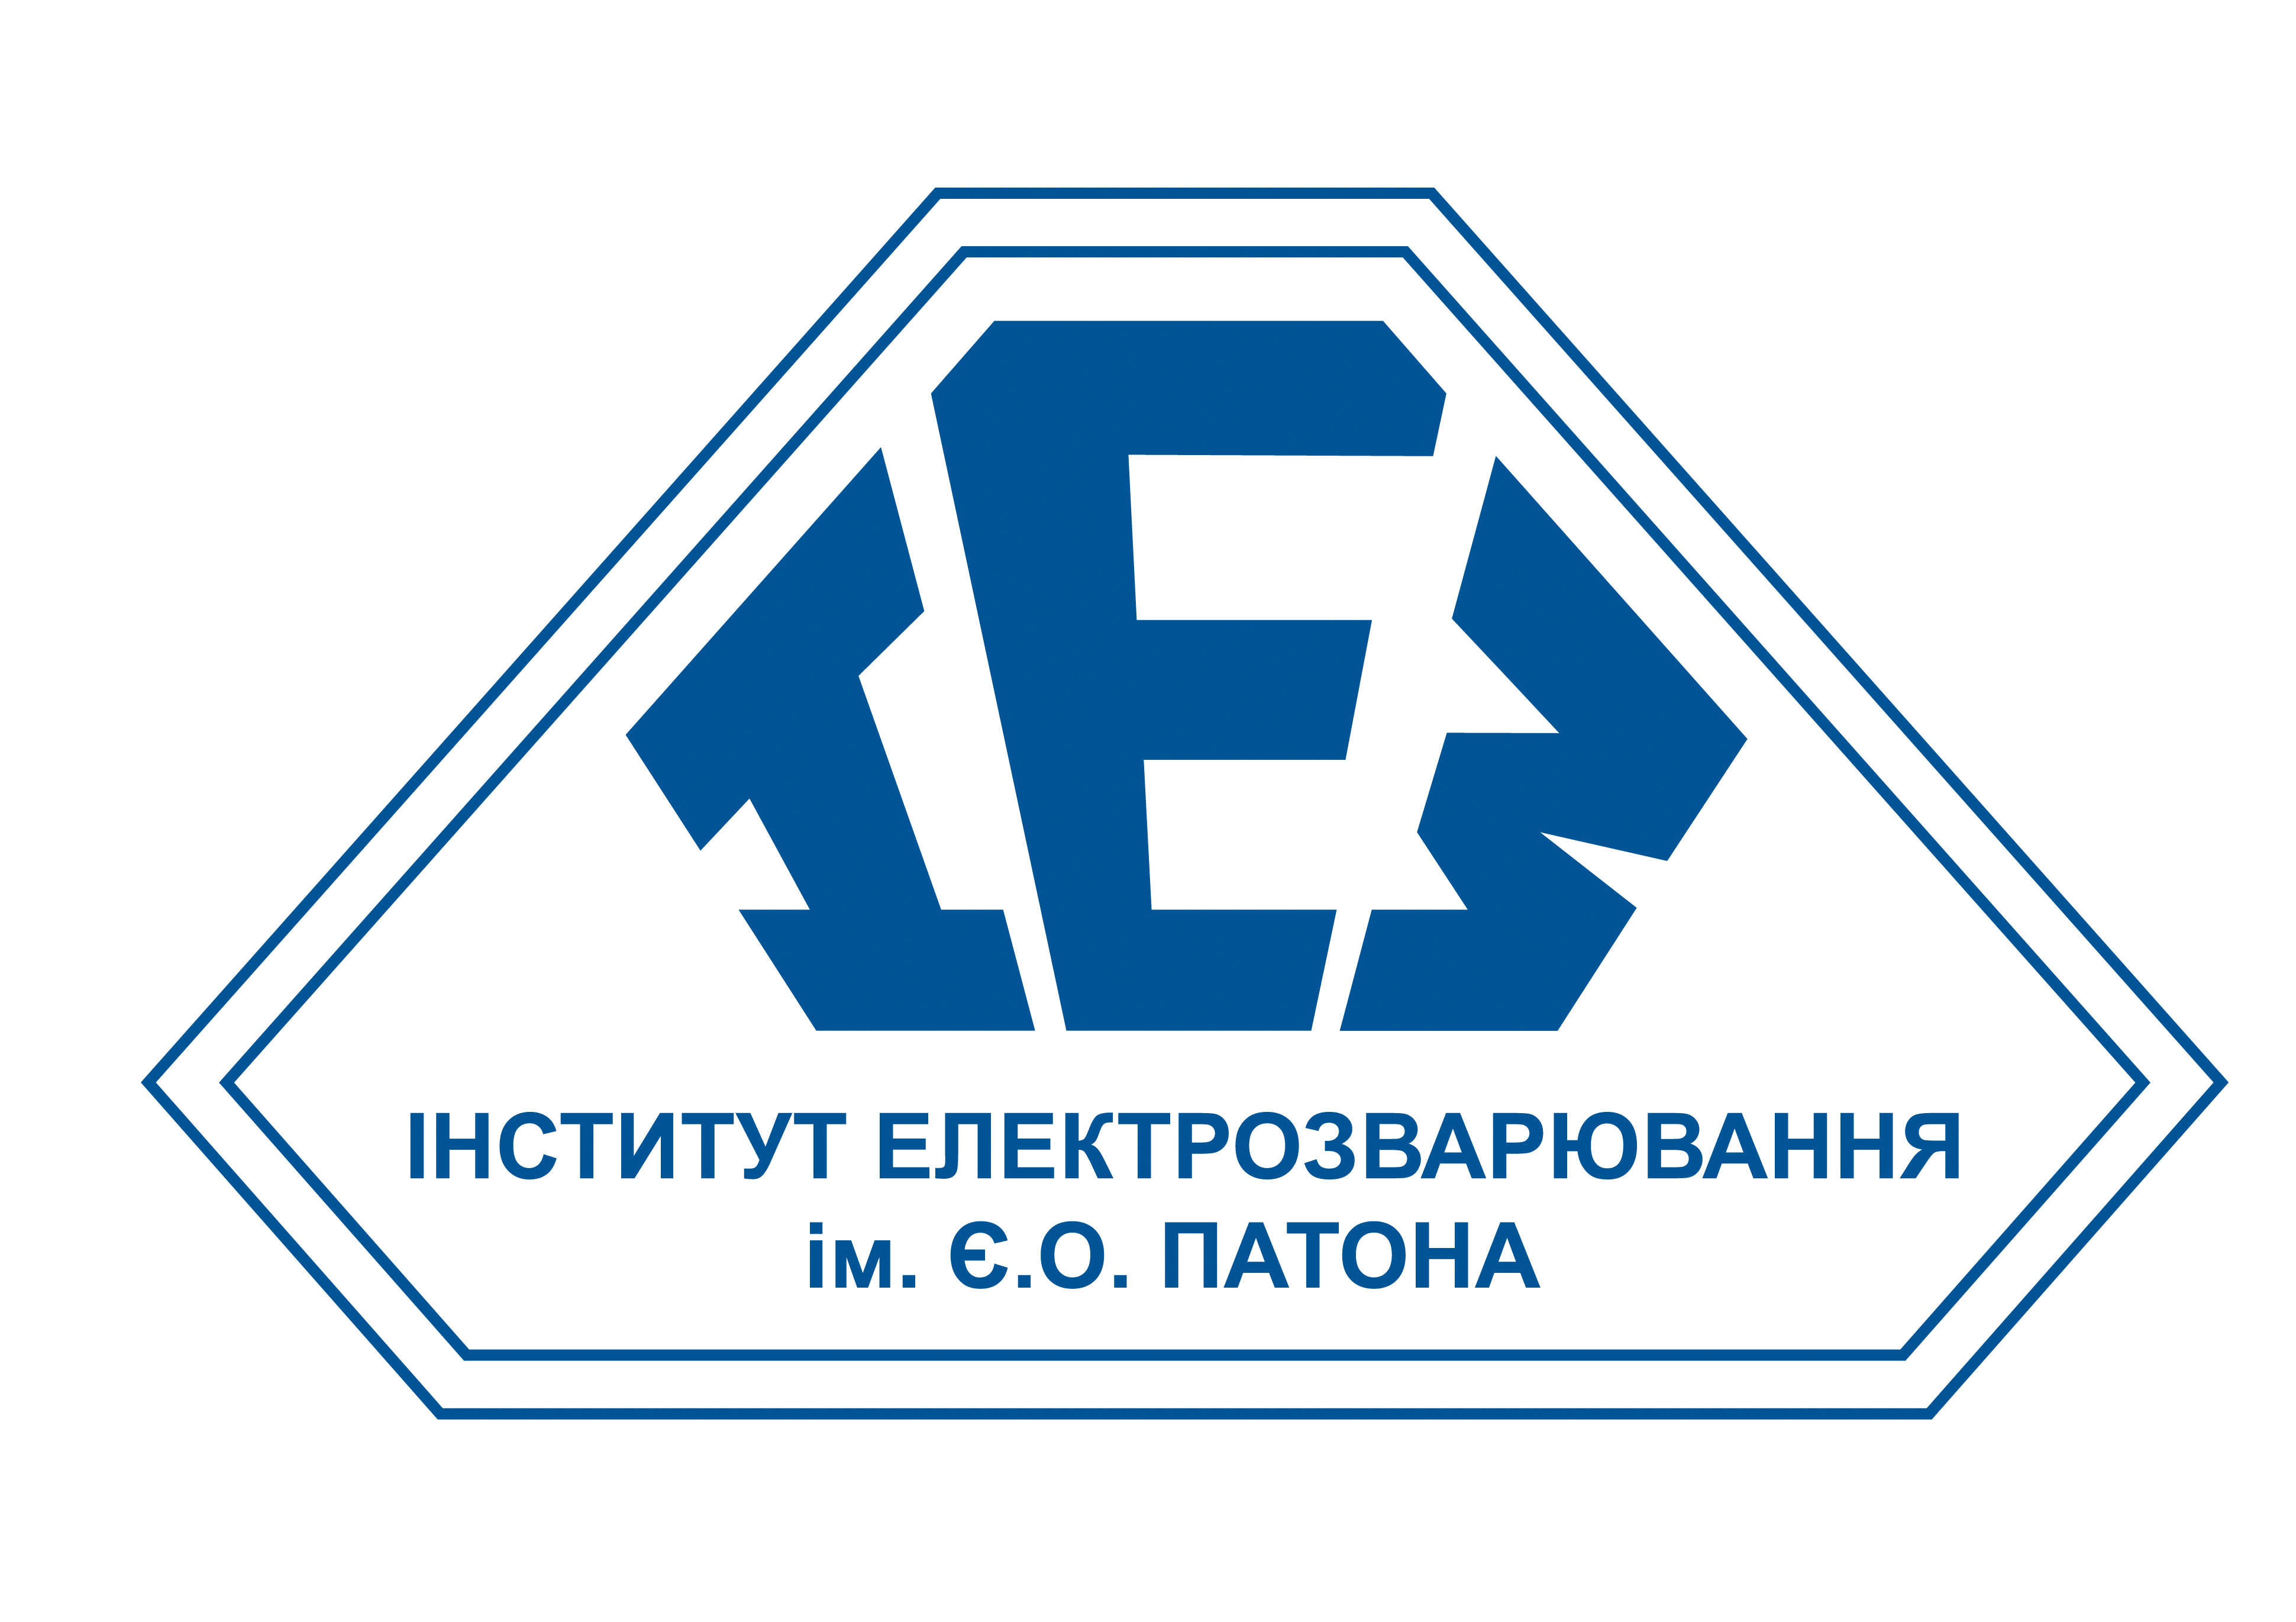 E.O. Paton Electric Welding Institute of the National Academy of Sciences of Ukraine